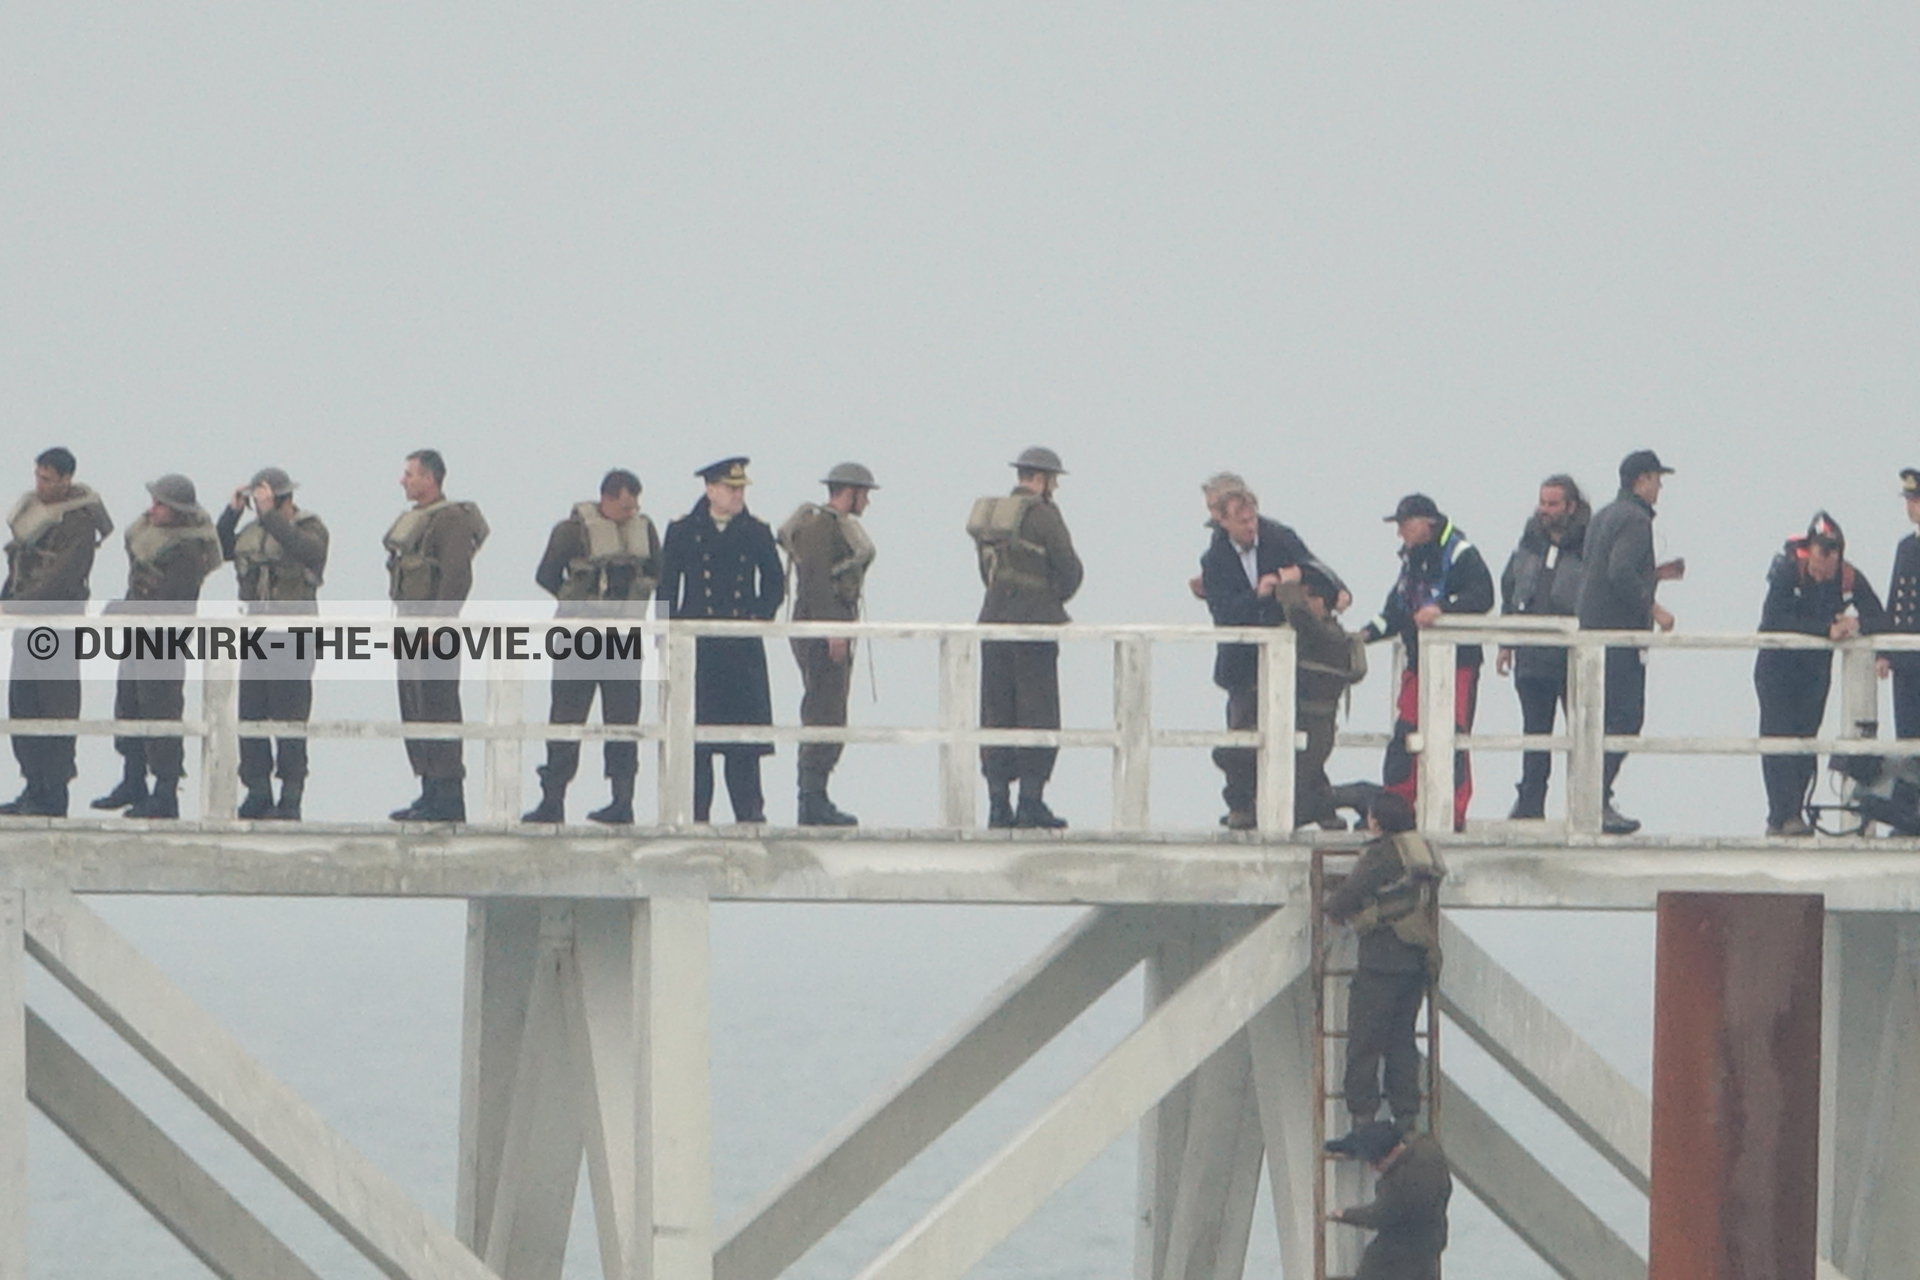 Picture with actor, grey sky, supernumeraries, Hoyte van Hoytema, EST pier, Kenneth Branagh, Christopher Nolan, technical team,  from behind the scene of the Dunkirk movie by Nolan